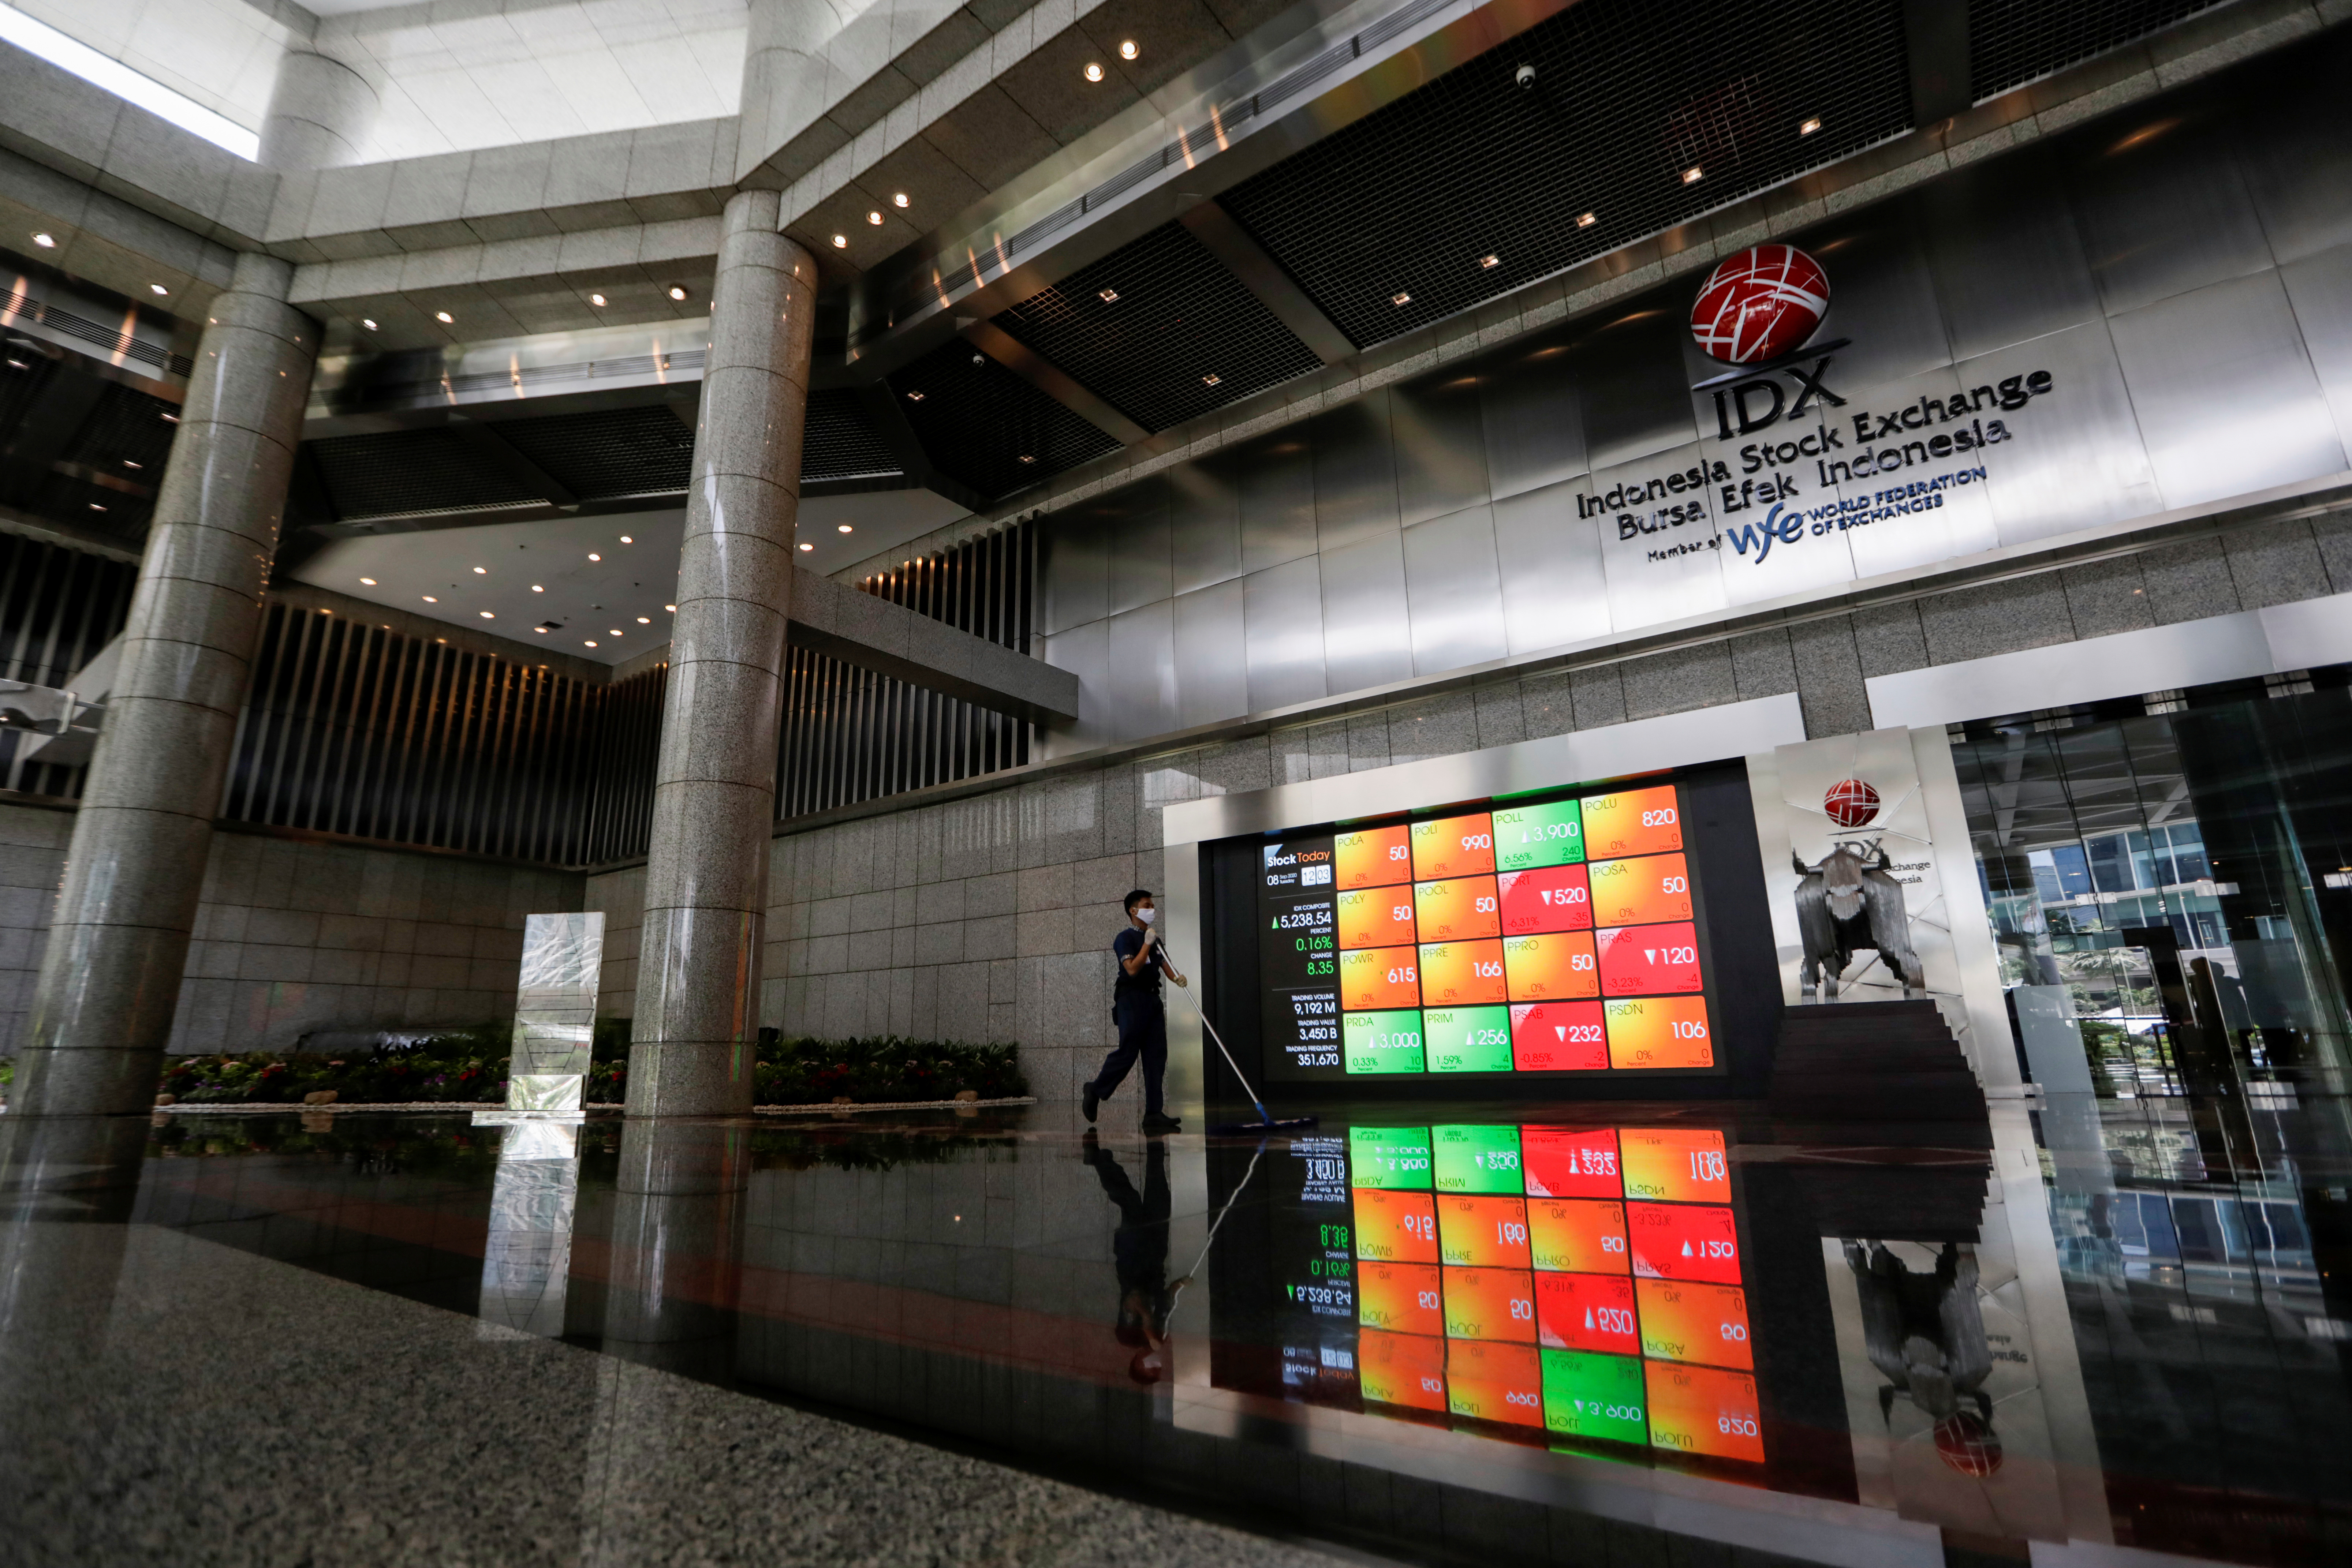 A worker wearing a protective mask cleans the floor near an electronic board displaying the stock market index at the Indonesia Stock Exchange (IDX), in Jakarta